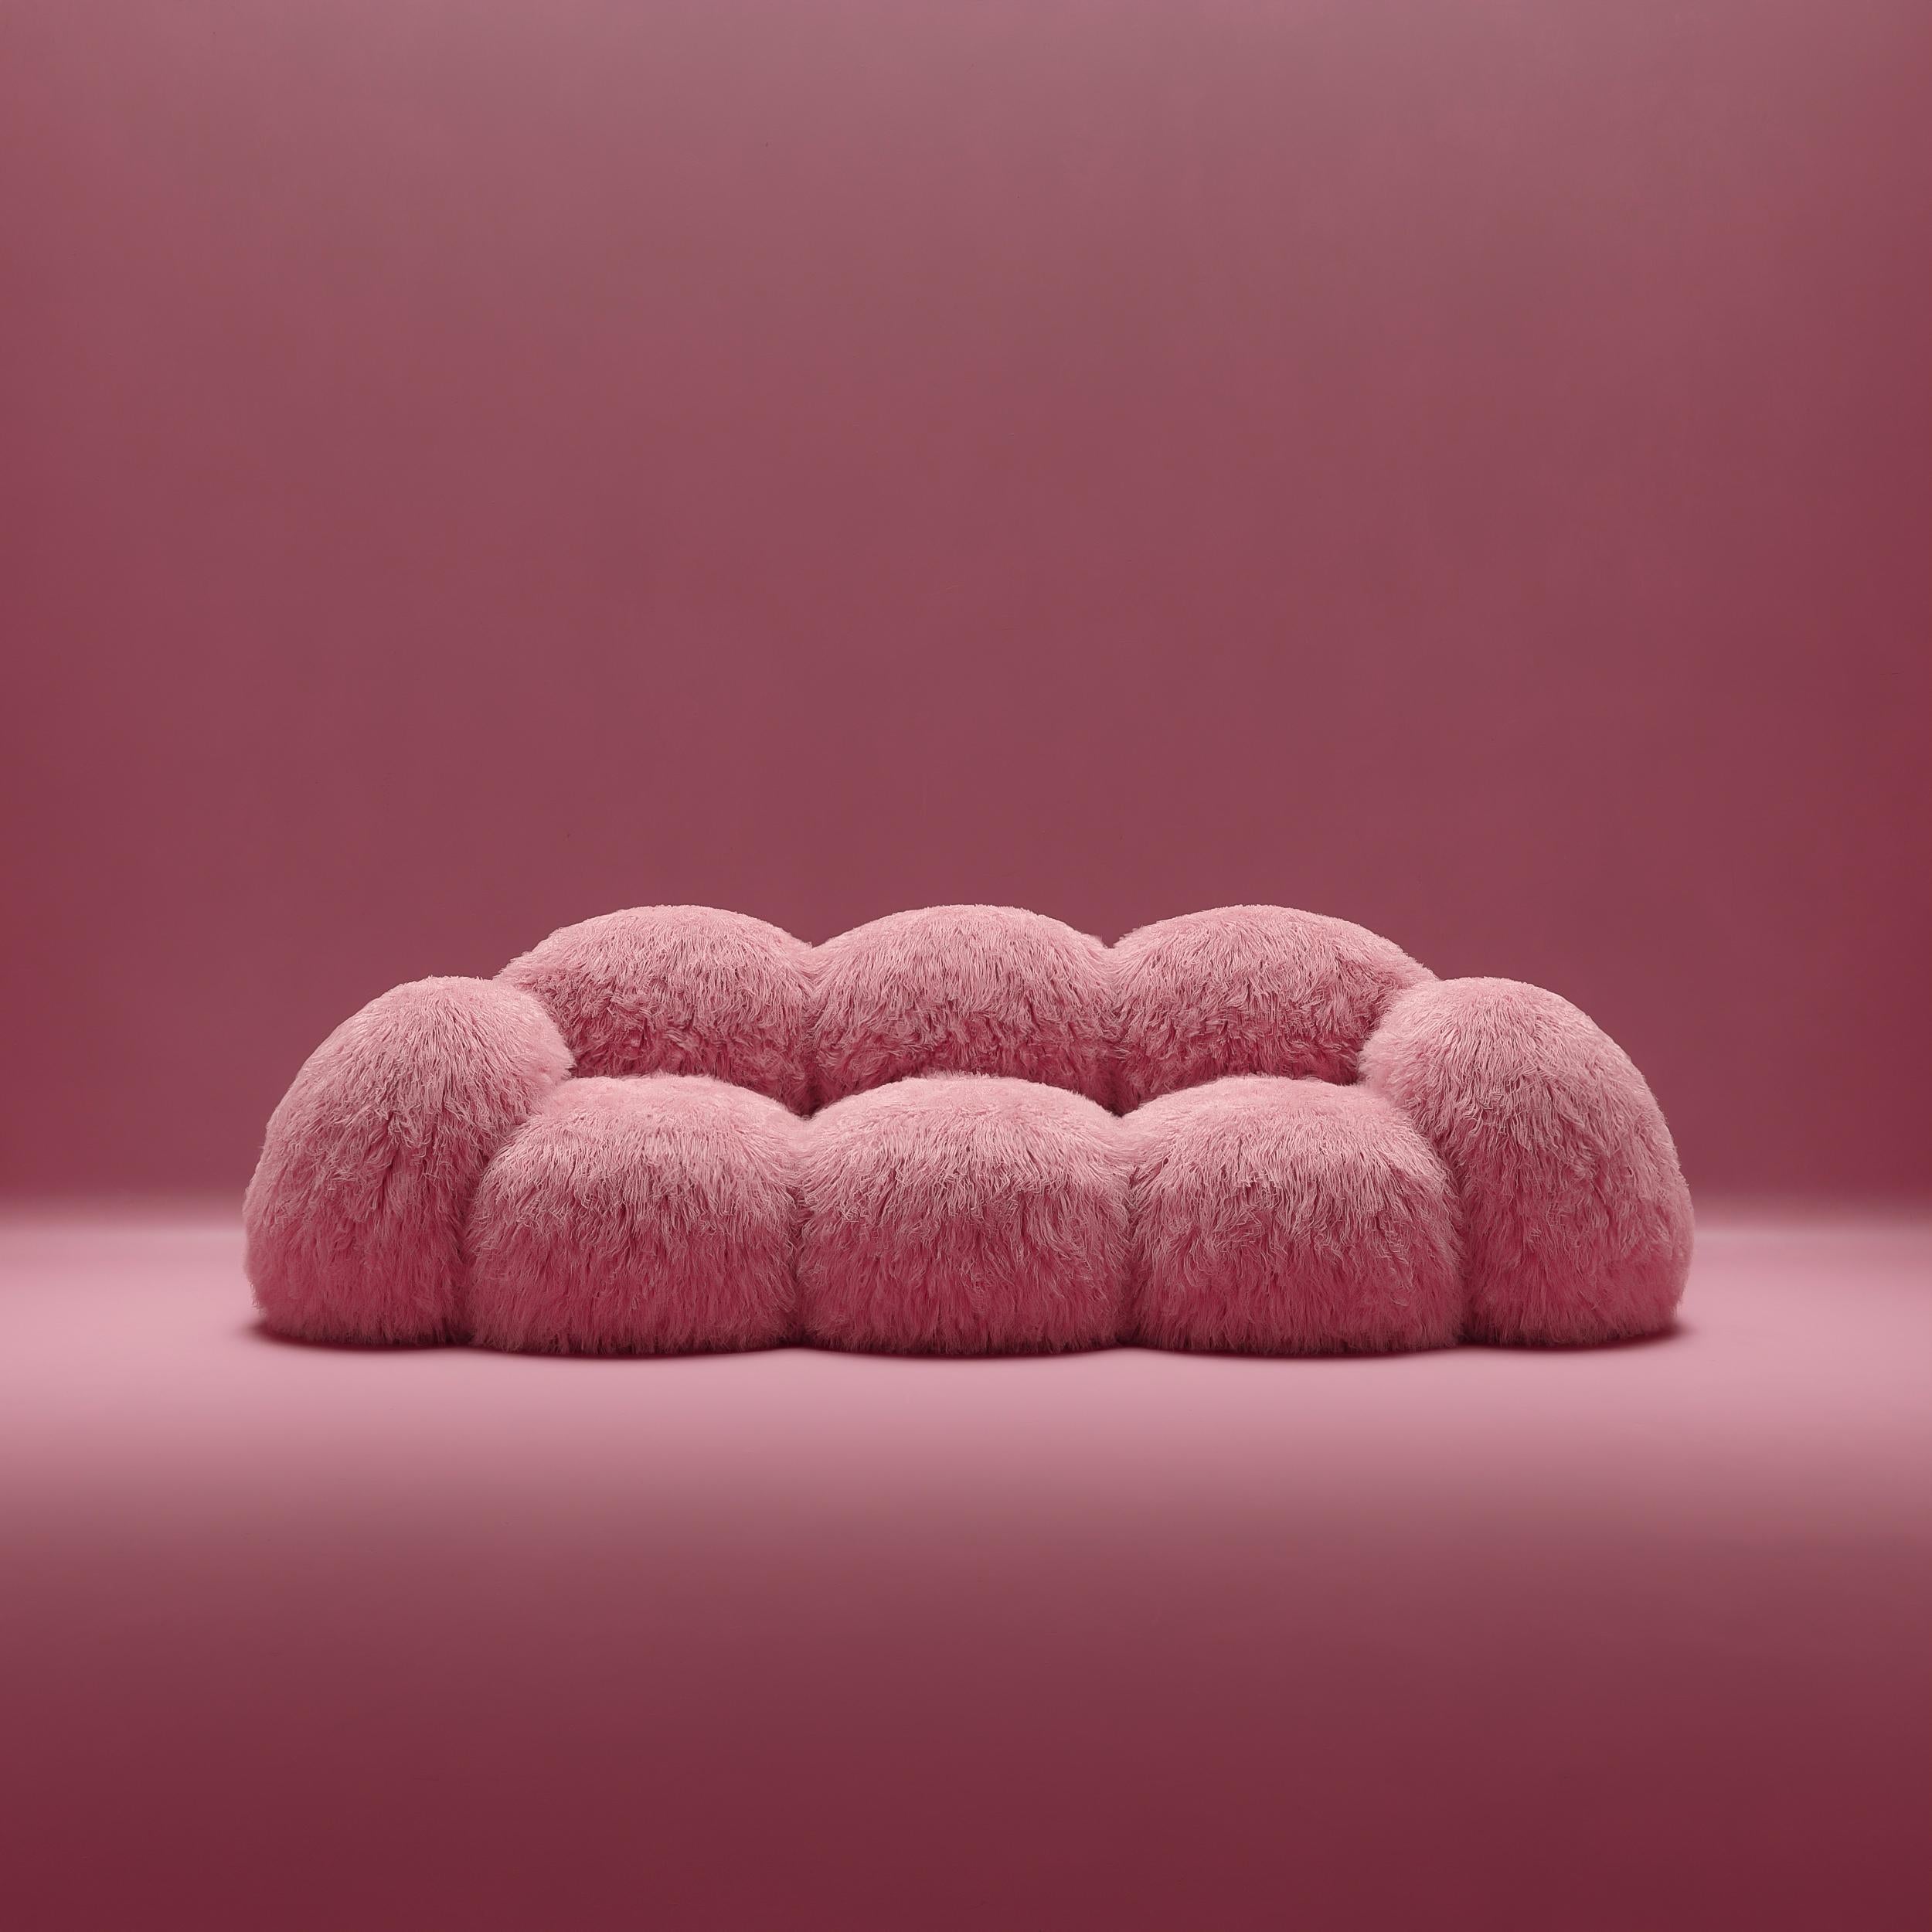 Yeti Triple sofa by Vladimir Naumov
Dimensions: H 79 x W 260 x L 108 cm
Materials: Faux Lama Fur

Yeti furniture series – minimalistic and huge, a soft and cozy pink cloud. Its bloated forms seem to cover you with a feeling of comfort, while the